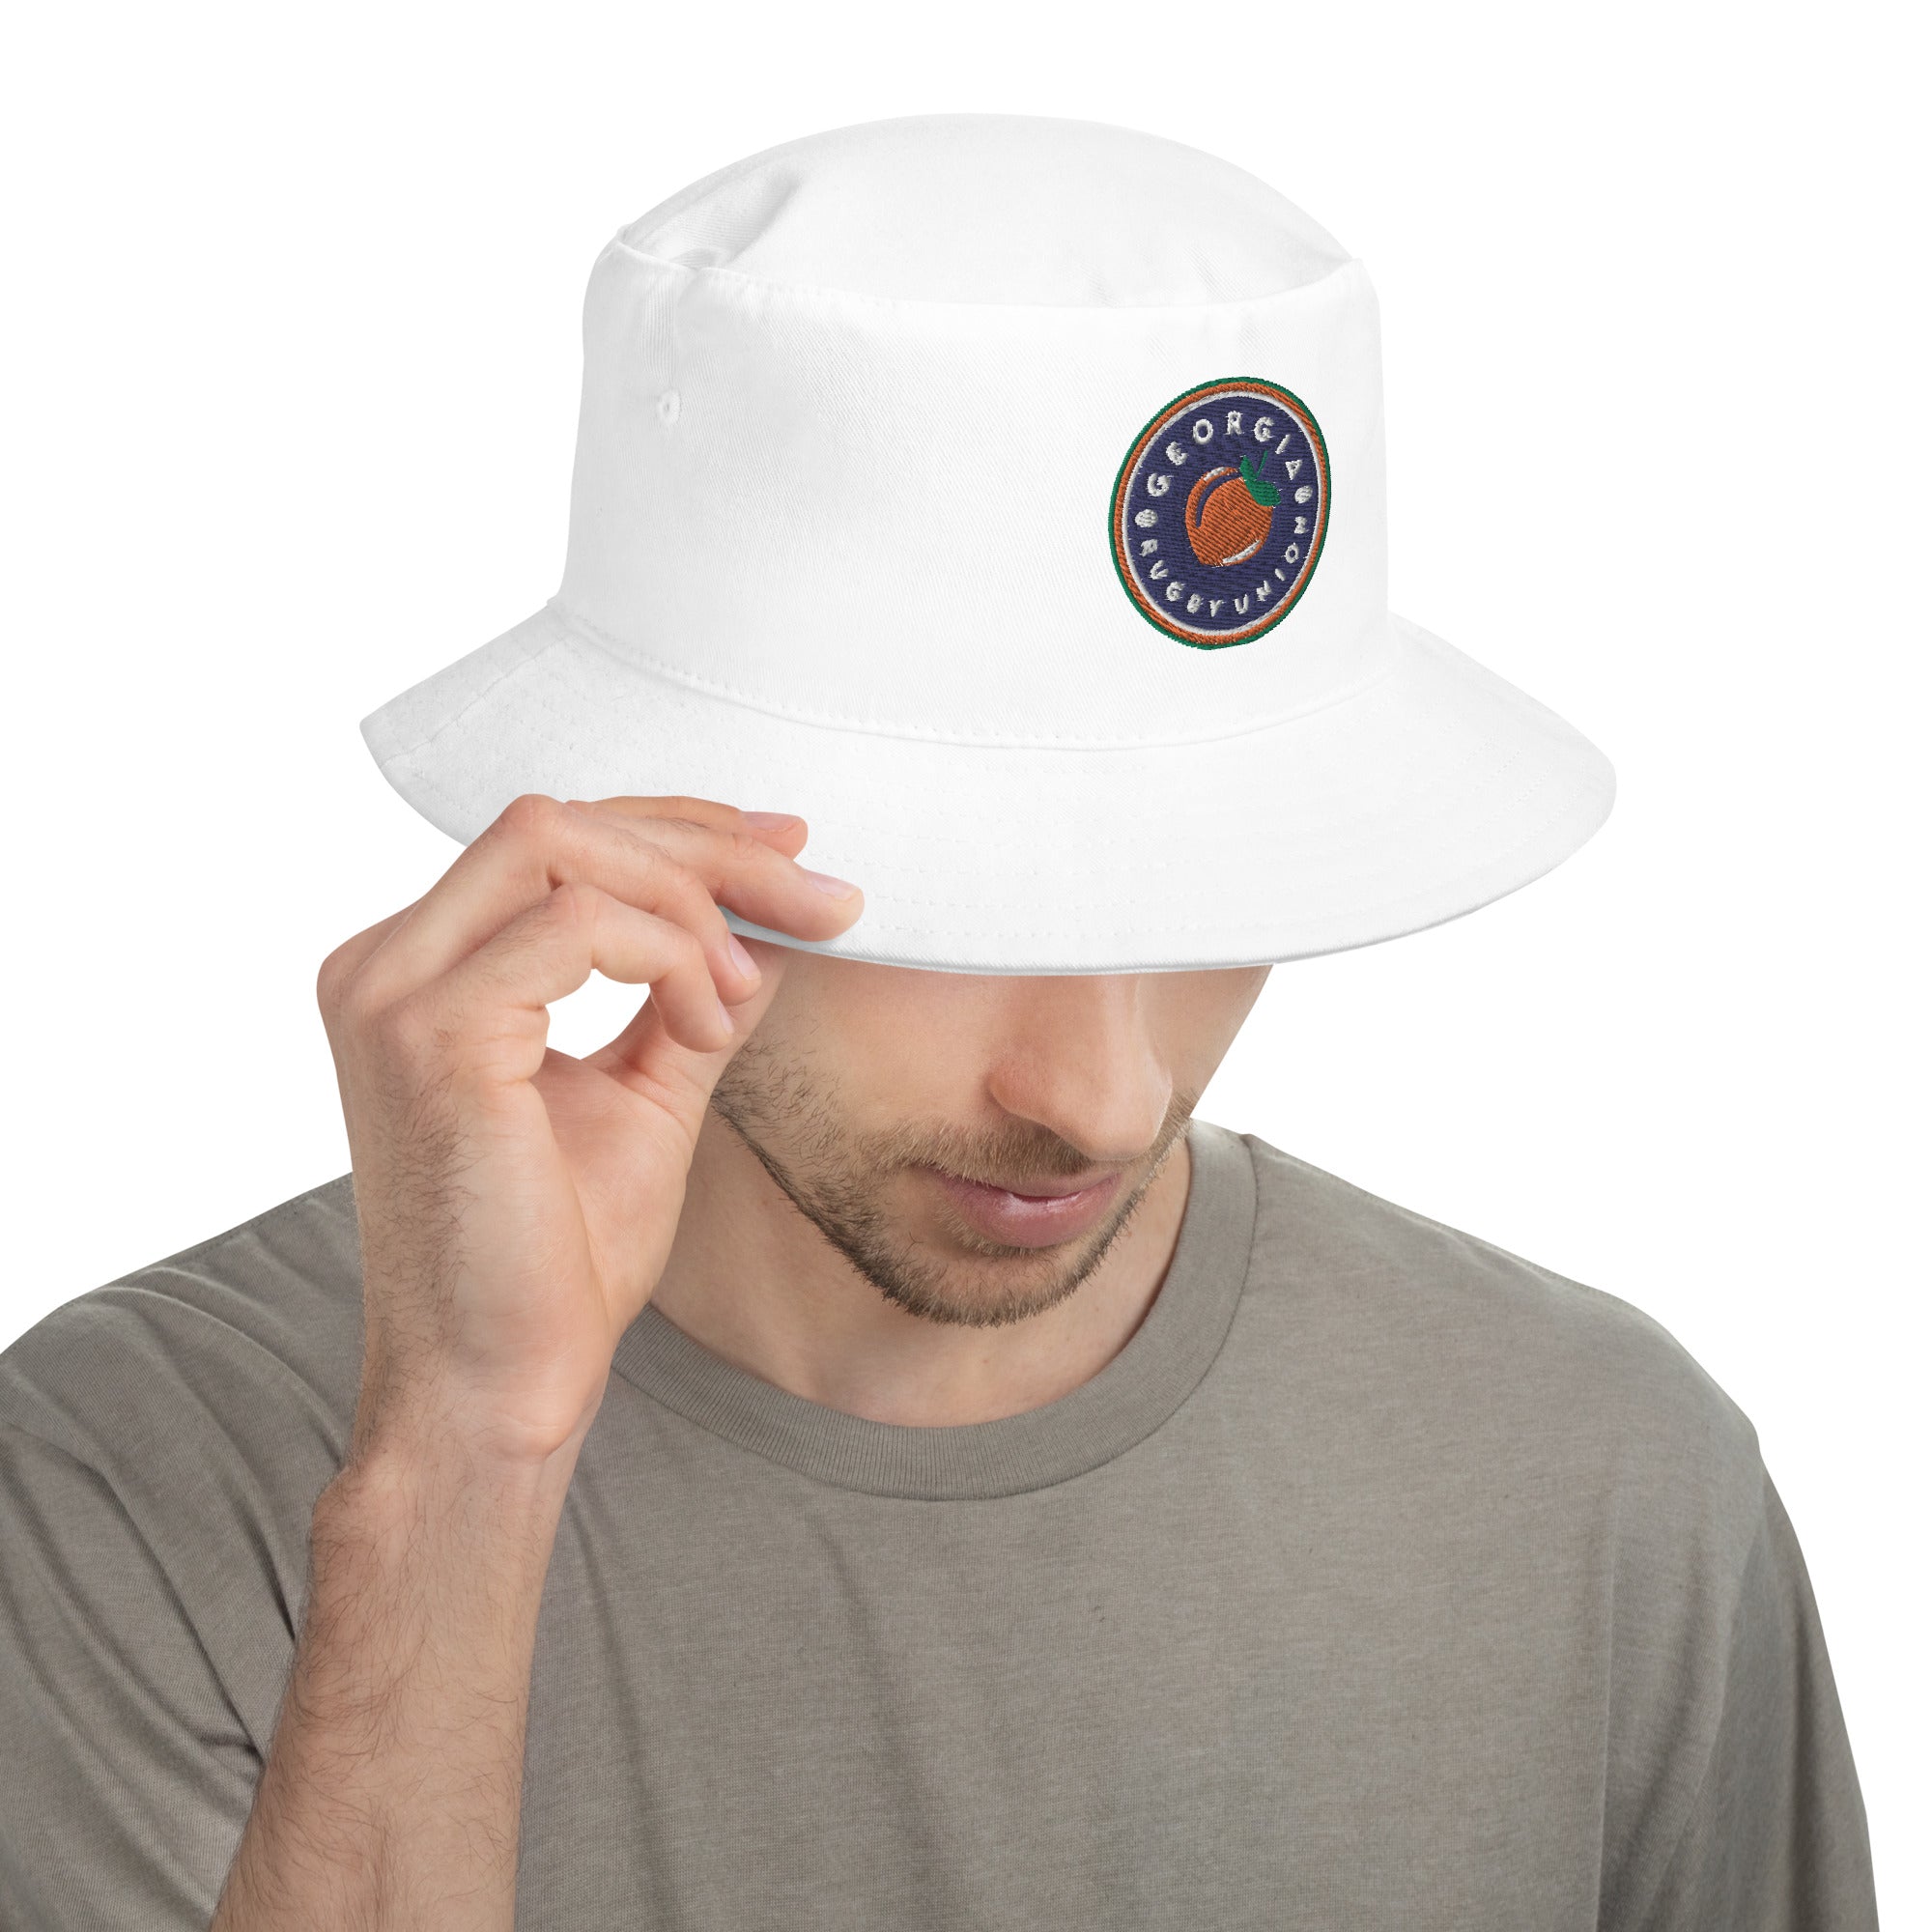 Rugby Imports Georgia Rugby Union Bucket Hat